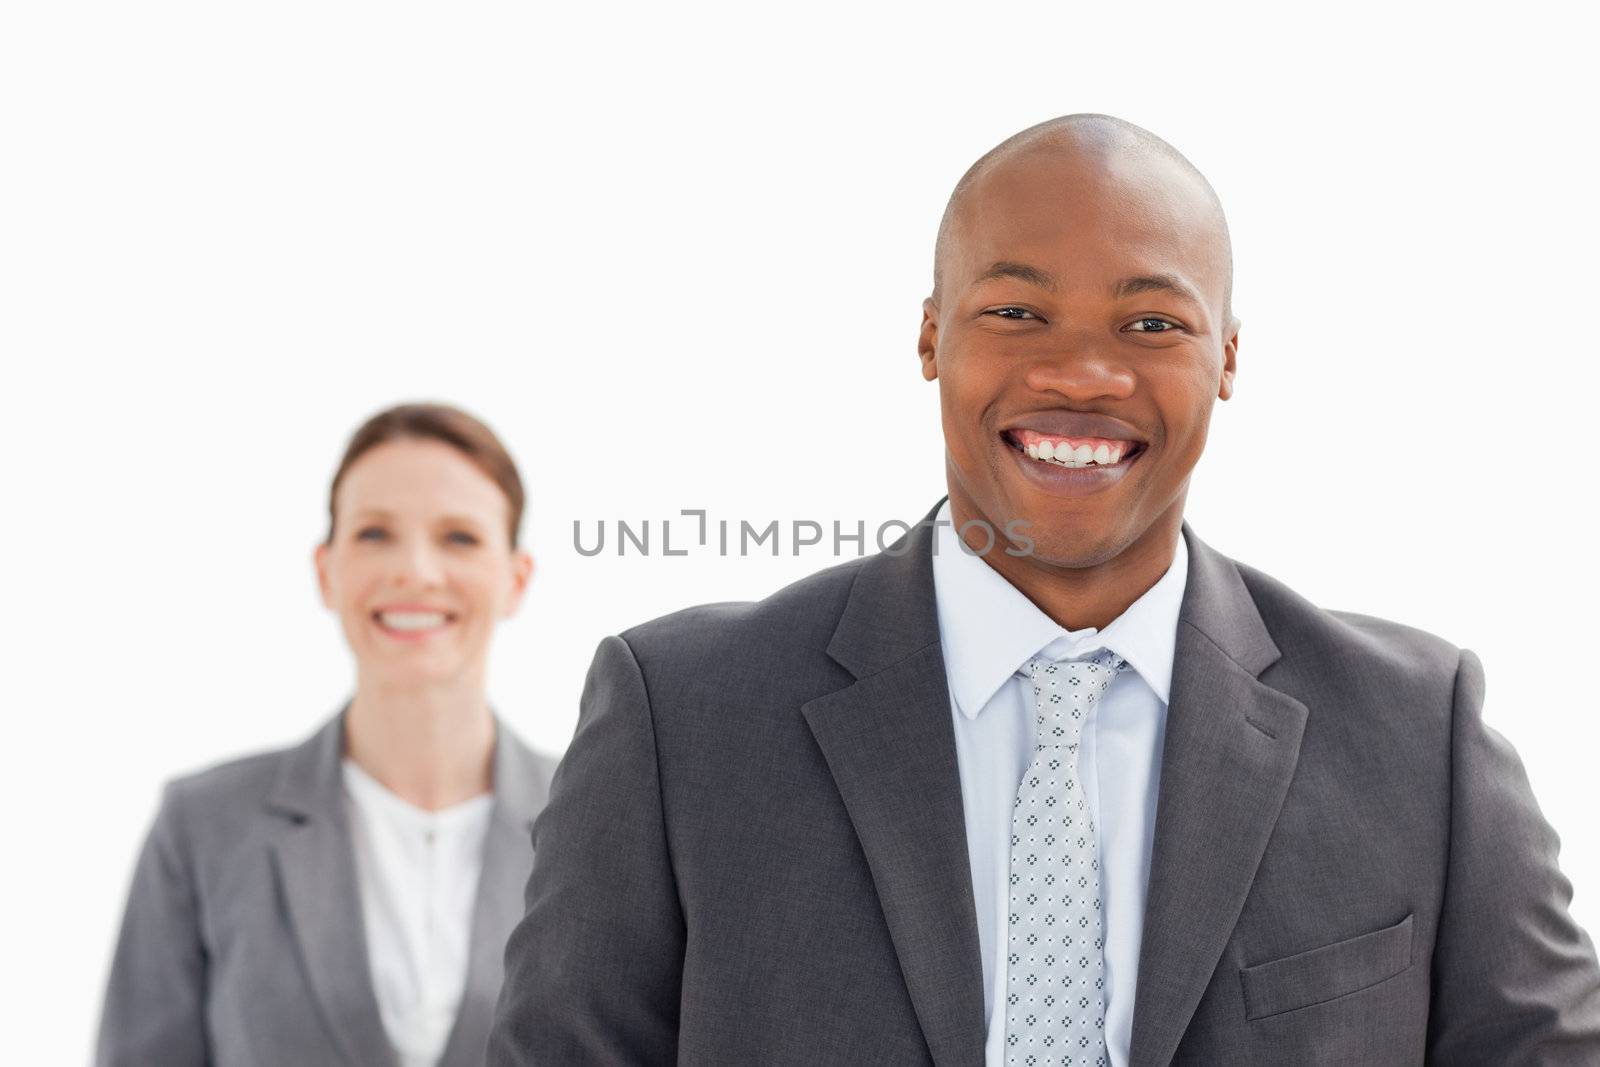 A smiling businesswoman stands behind smiling business man